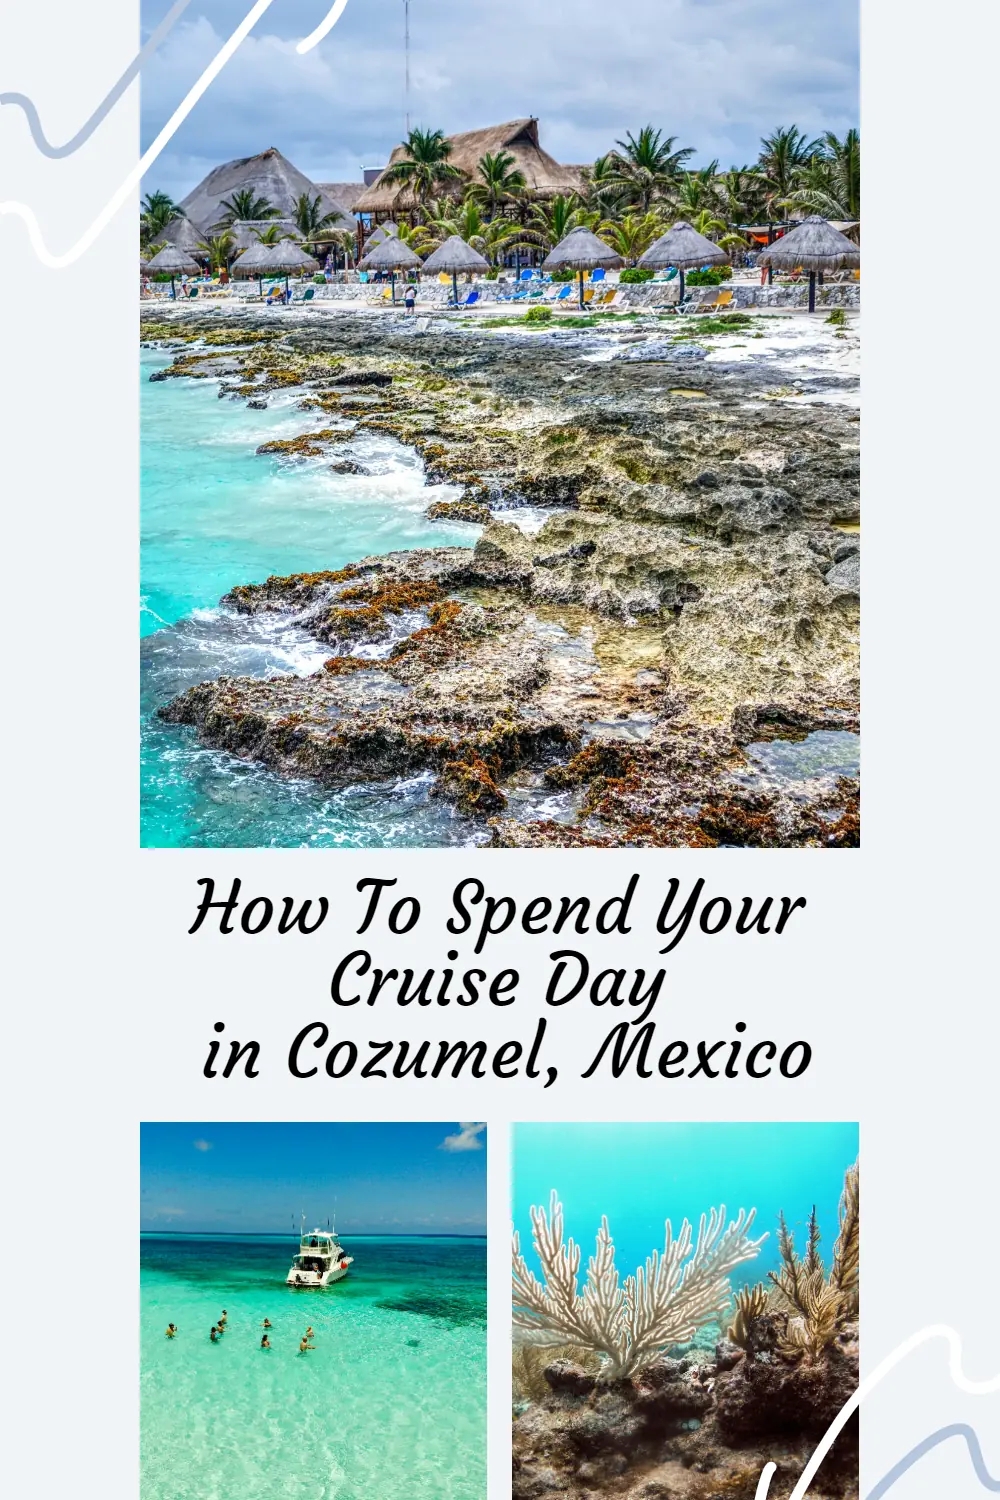 Navigating a new destination can be challenging. Let’s make your travel to Cozumel, Mexico hassle-free! From best beach clubs to must-try activities, get all the insider tips to make the most of your time on this beautiful Caribbean island. An informative guide to help you plan like a true travel pro!